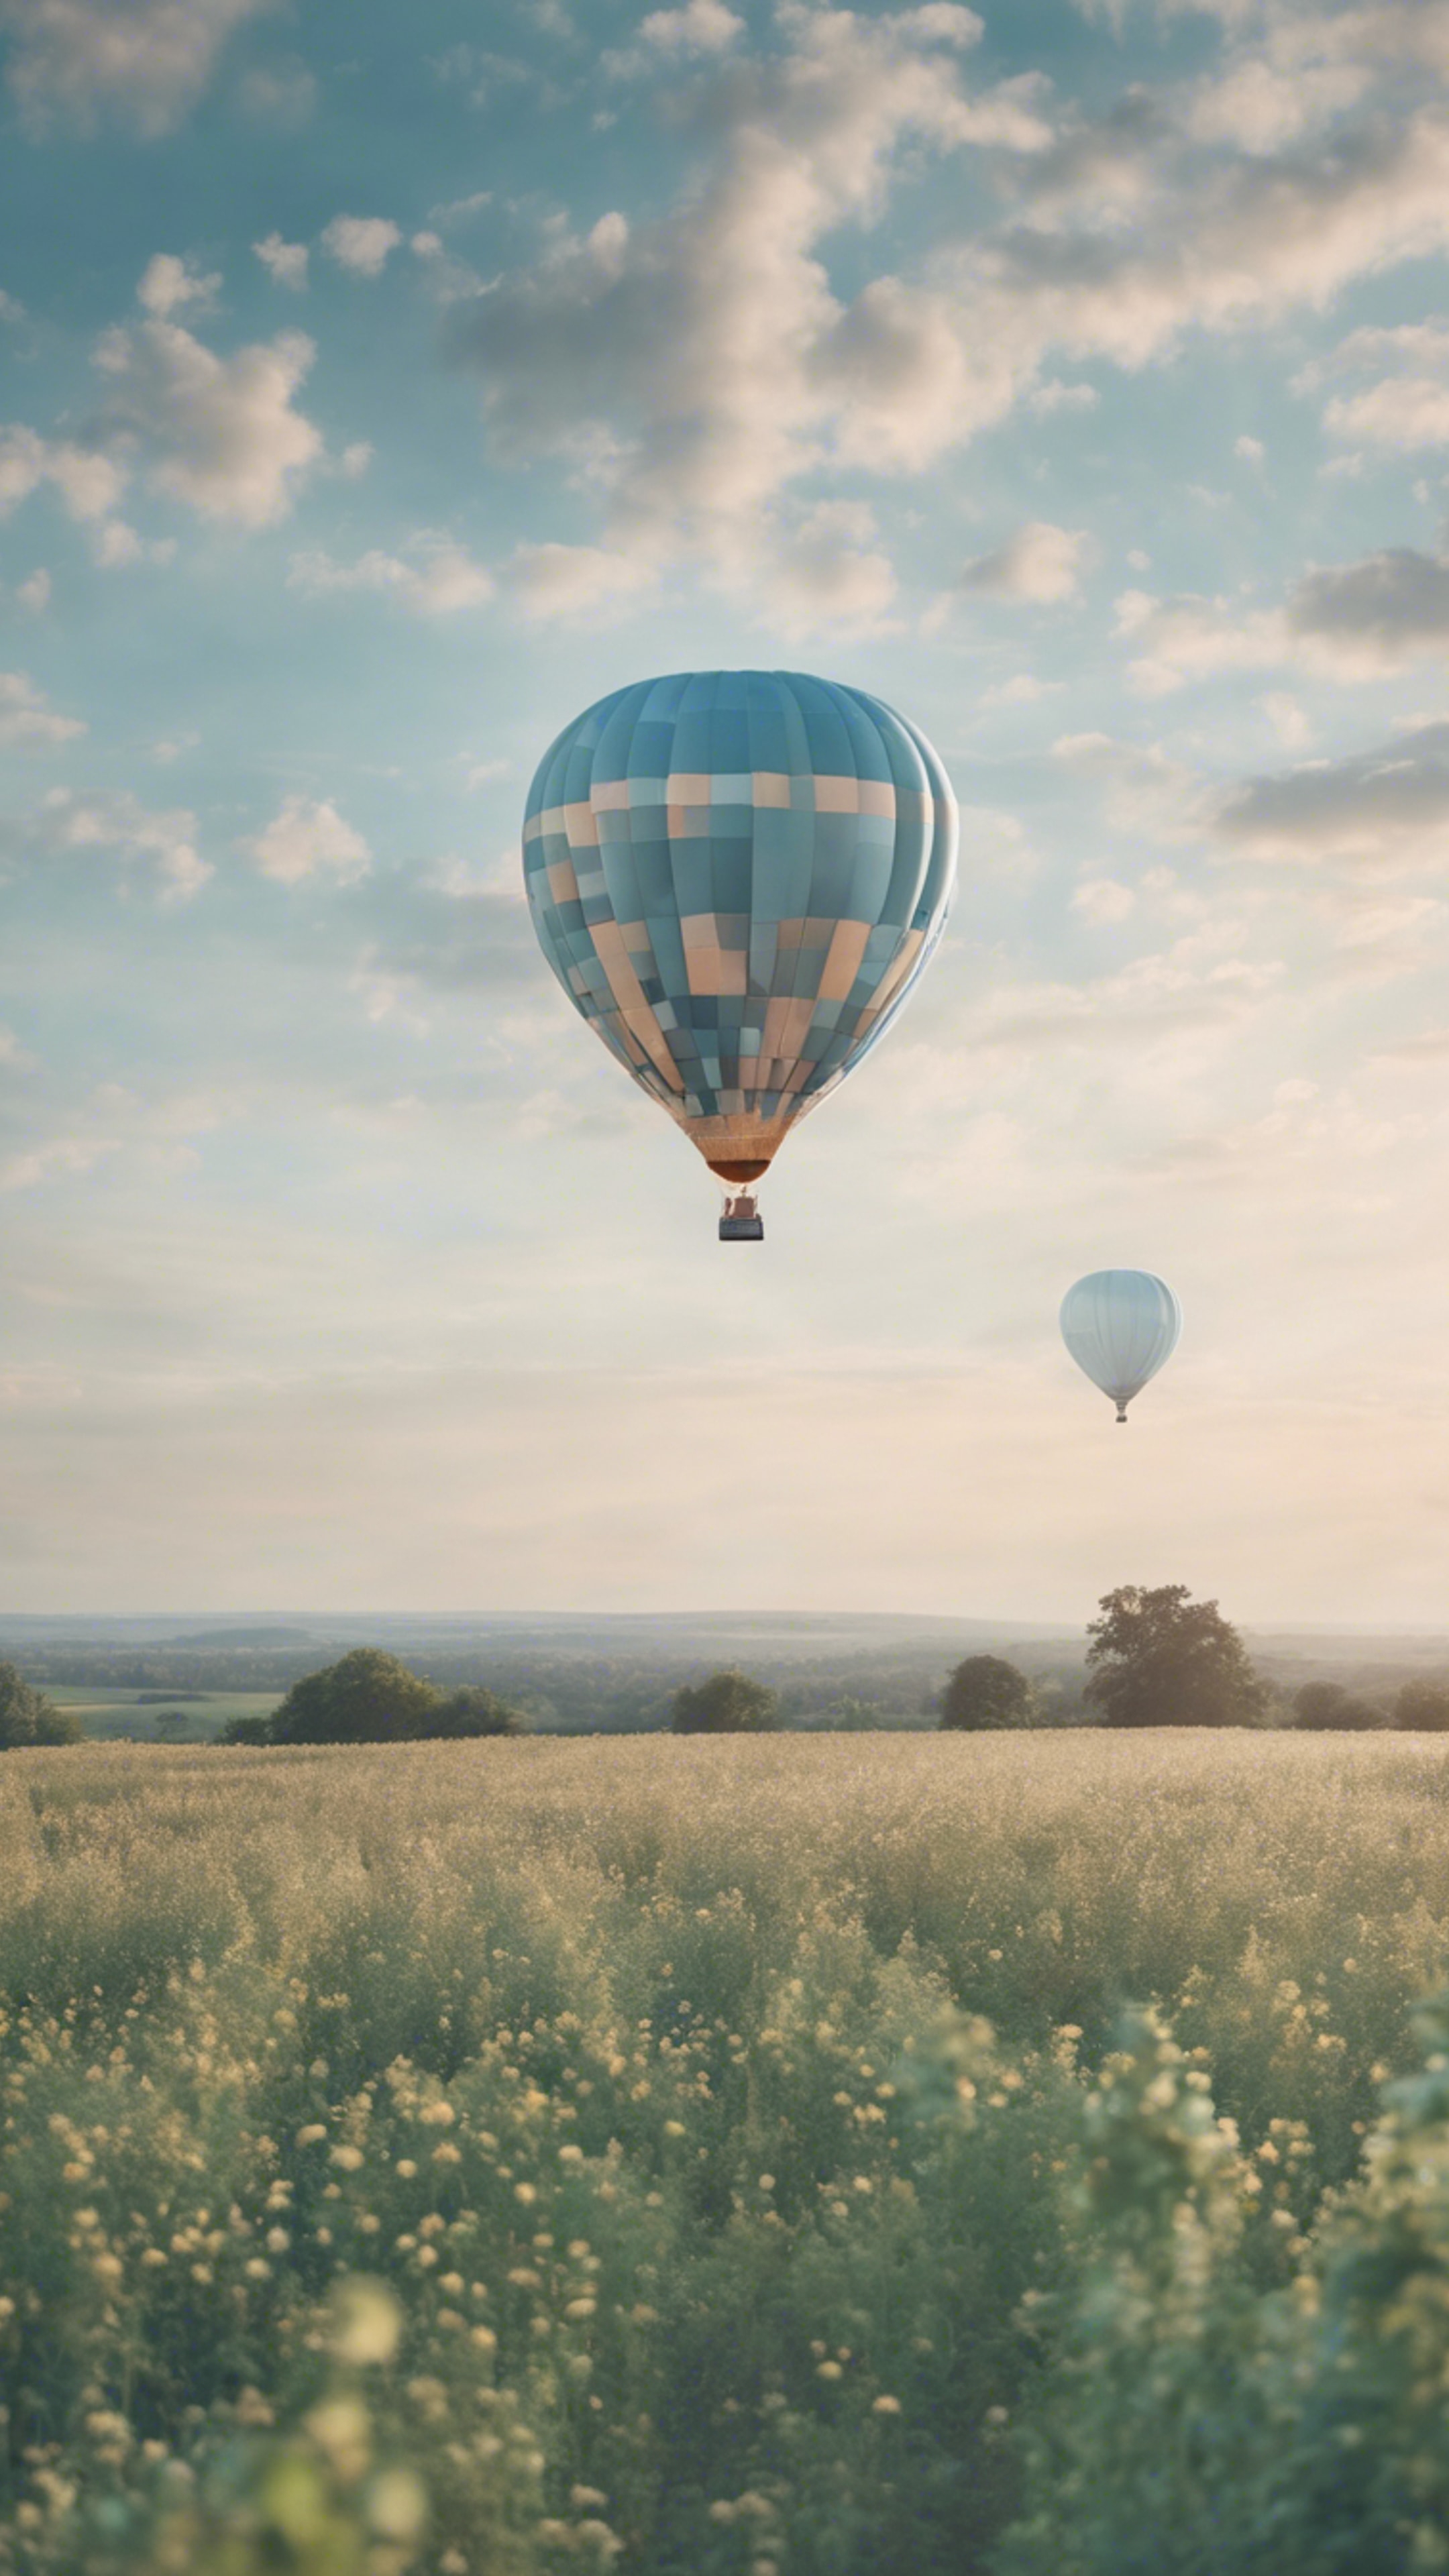 A pastel blue hot air balloon floating serenely above a patchwork field. کاغذ دیواری[b19c340976c044f4b3c6]